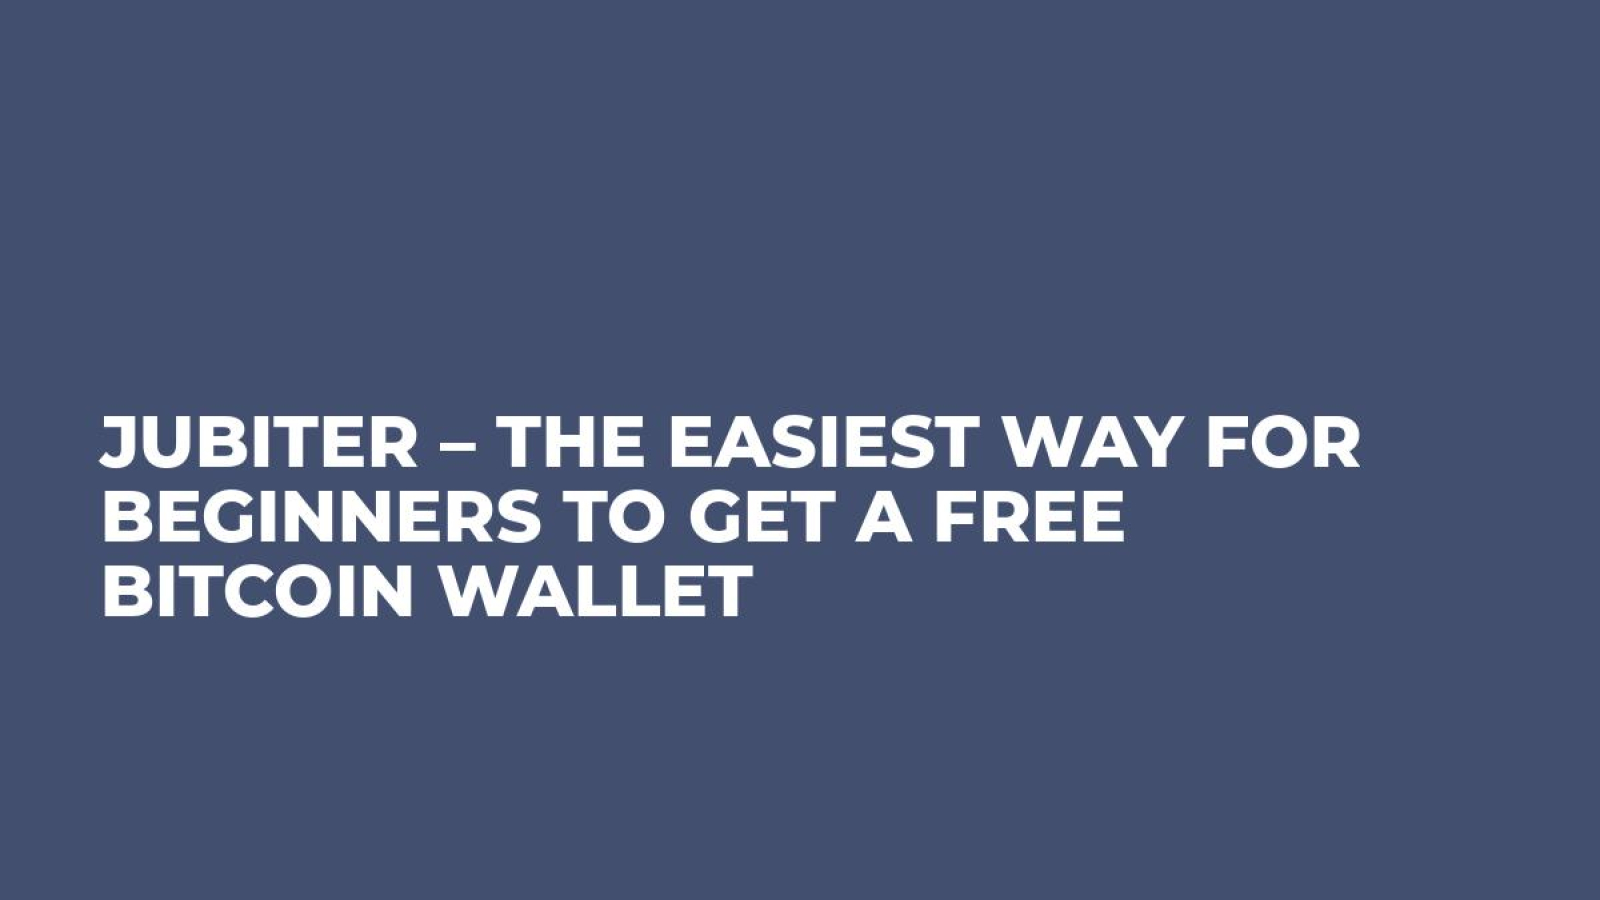 Jubiter – The Easiest Way for Beginners to Get a Free Bitcoin Wallet